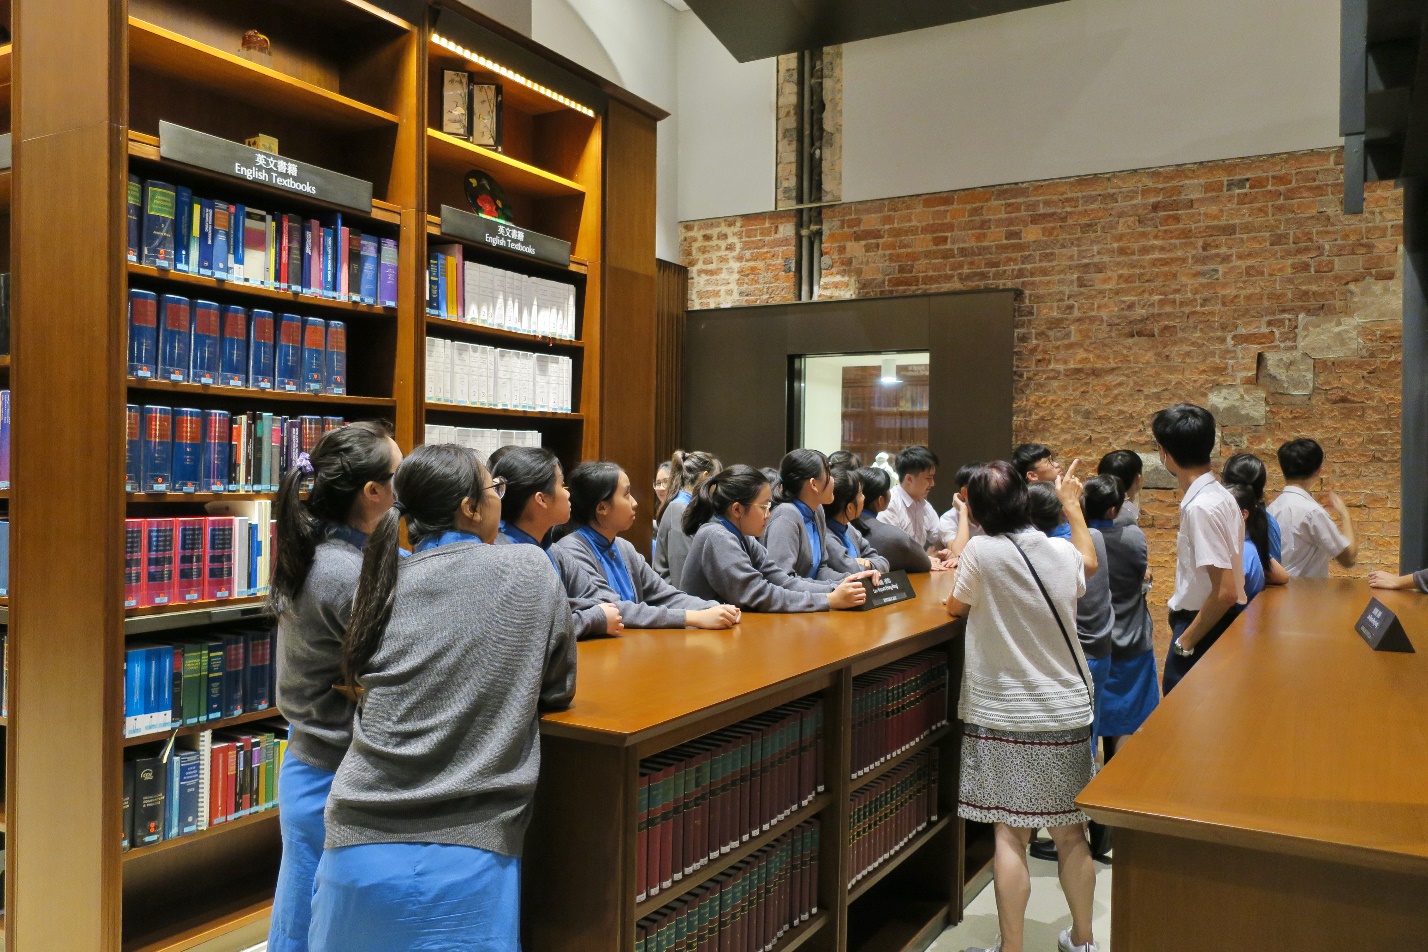 Students joining the school guided visit to the Court of Final Appeal visit the library